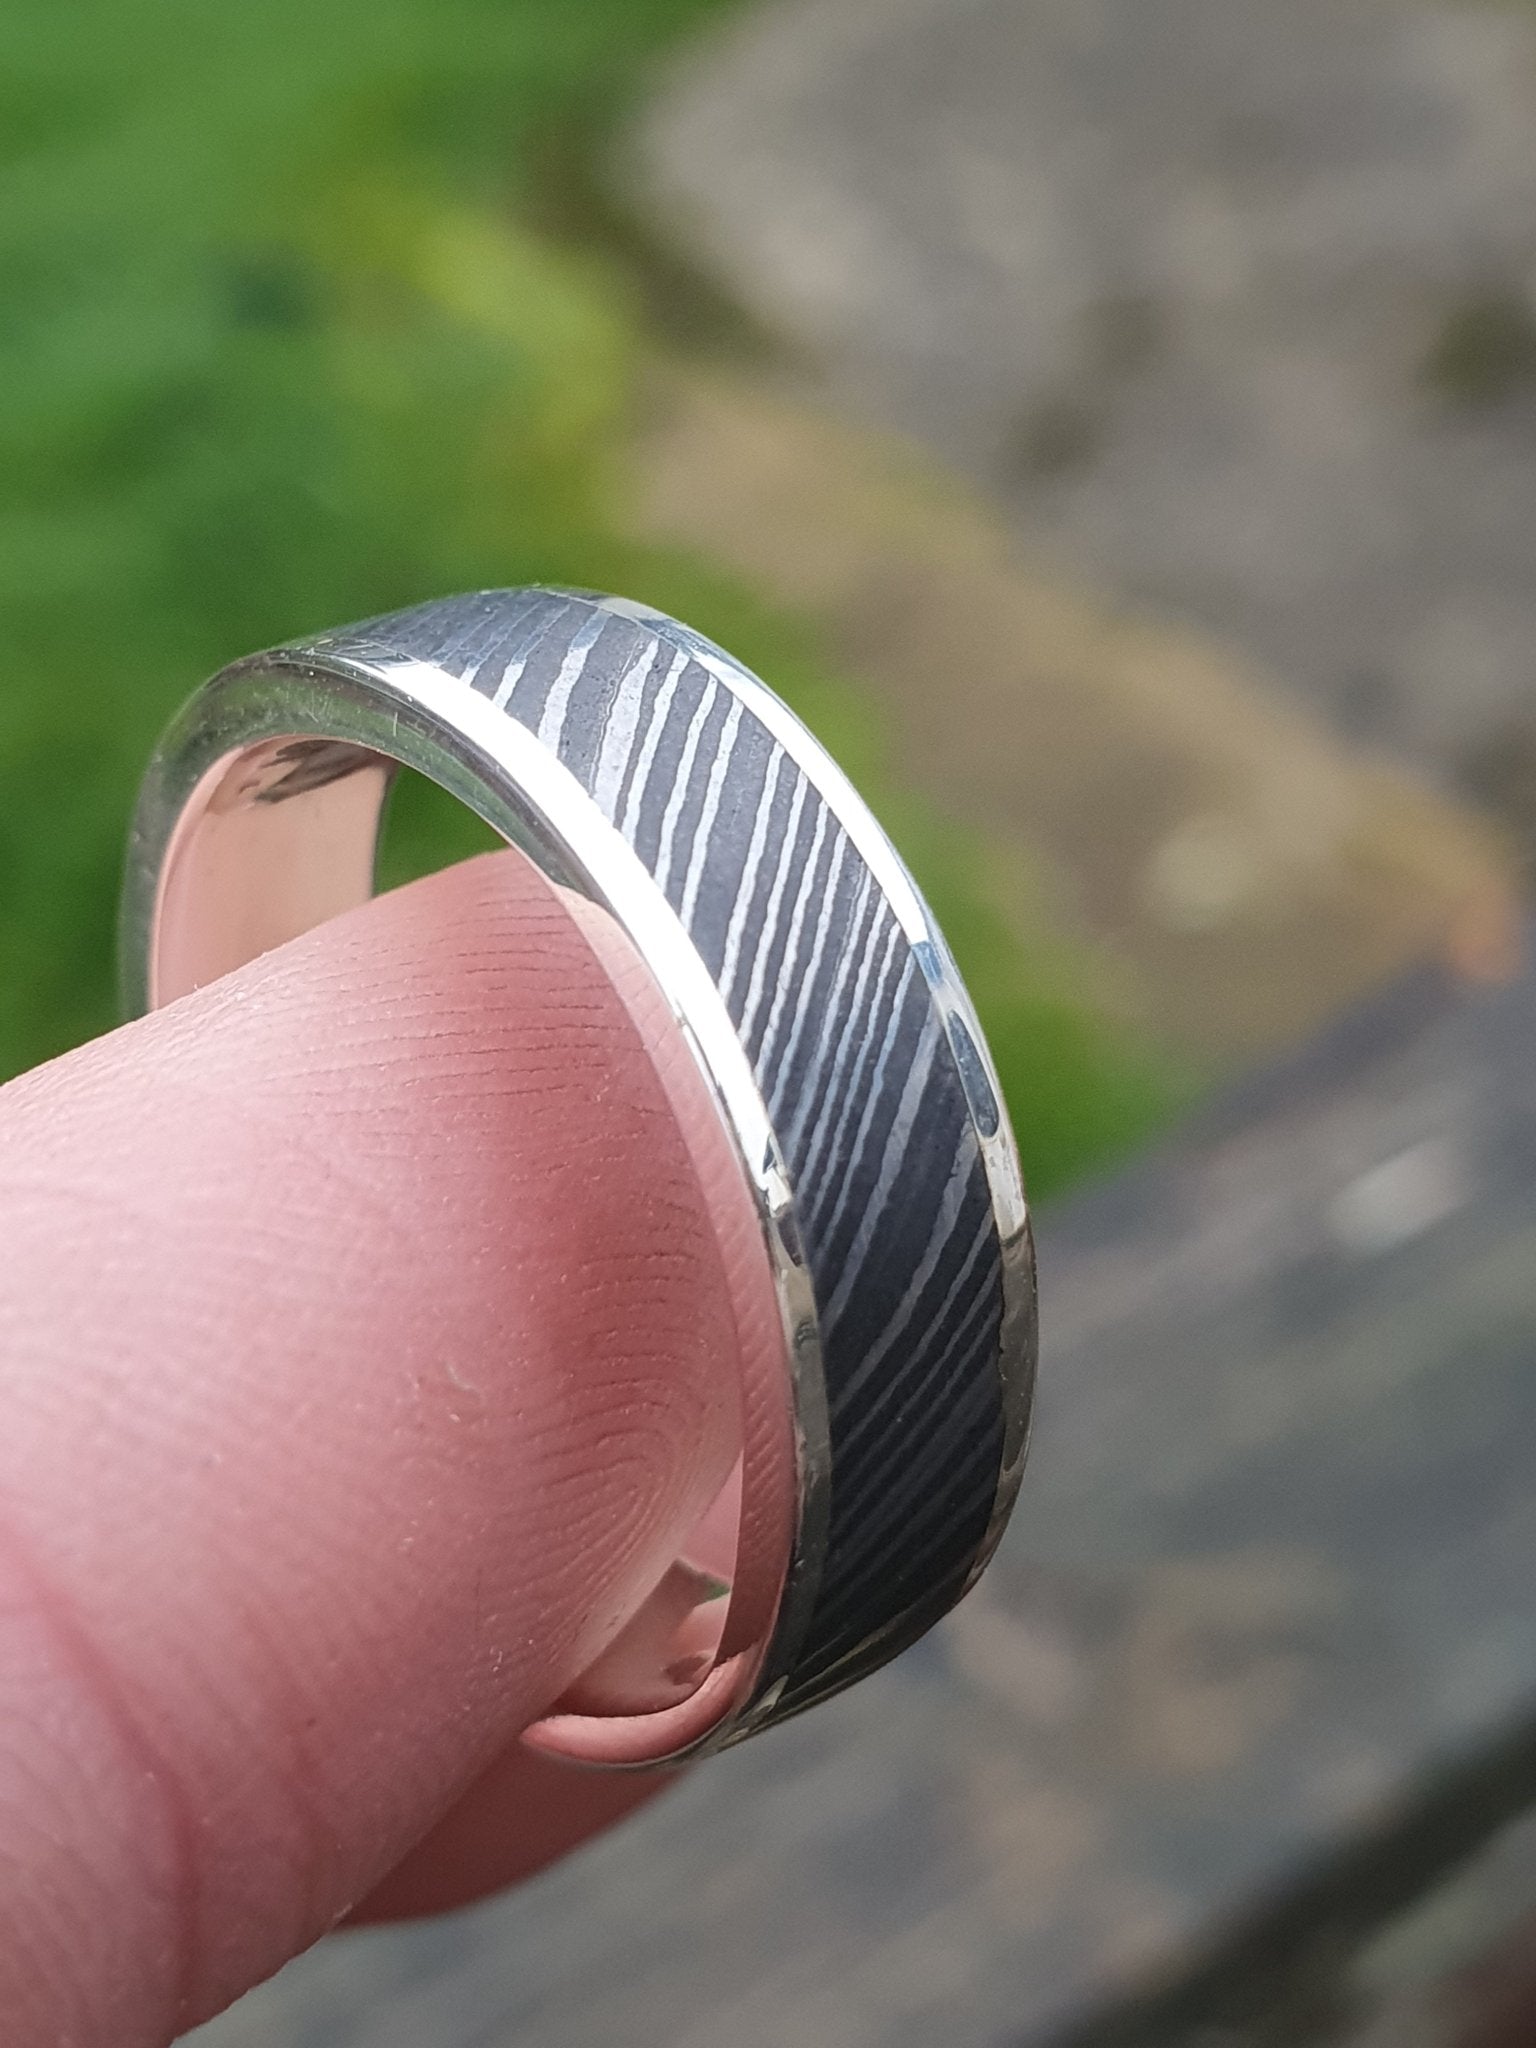 Damascus and Silver Ring - AlfiesHandCrafts